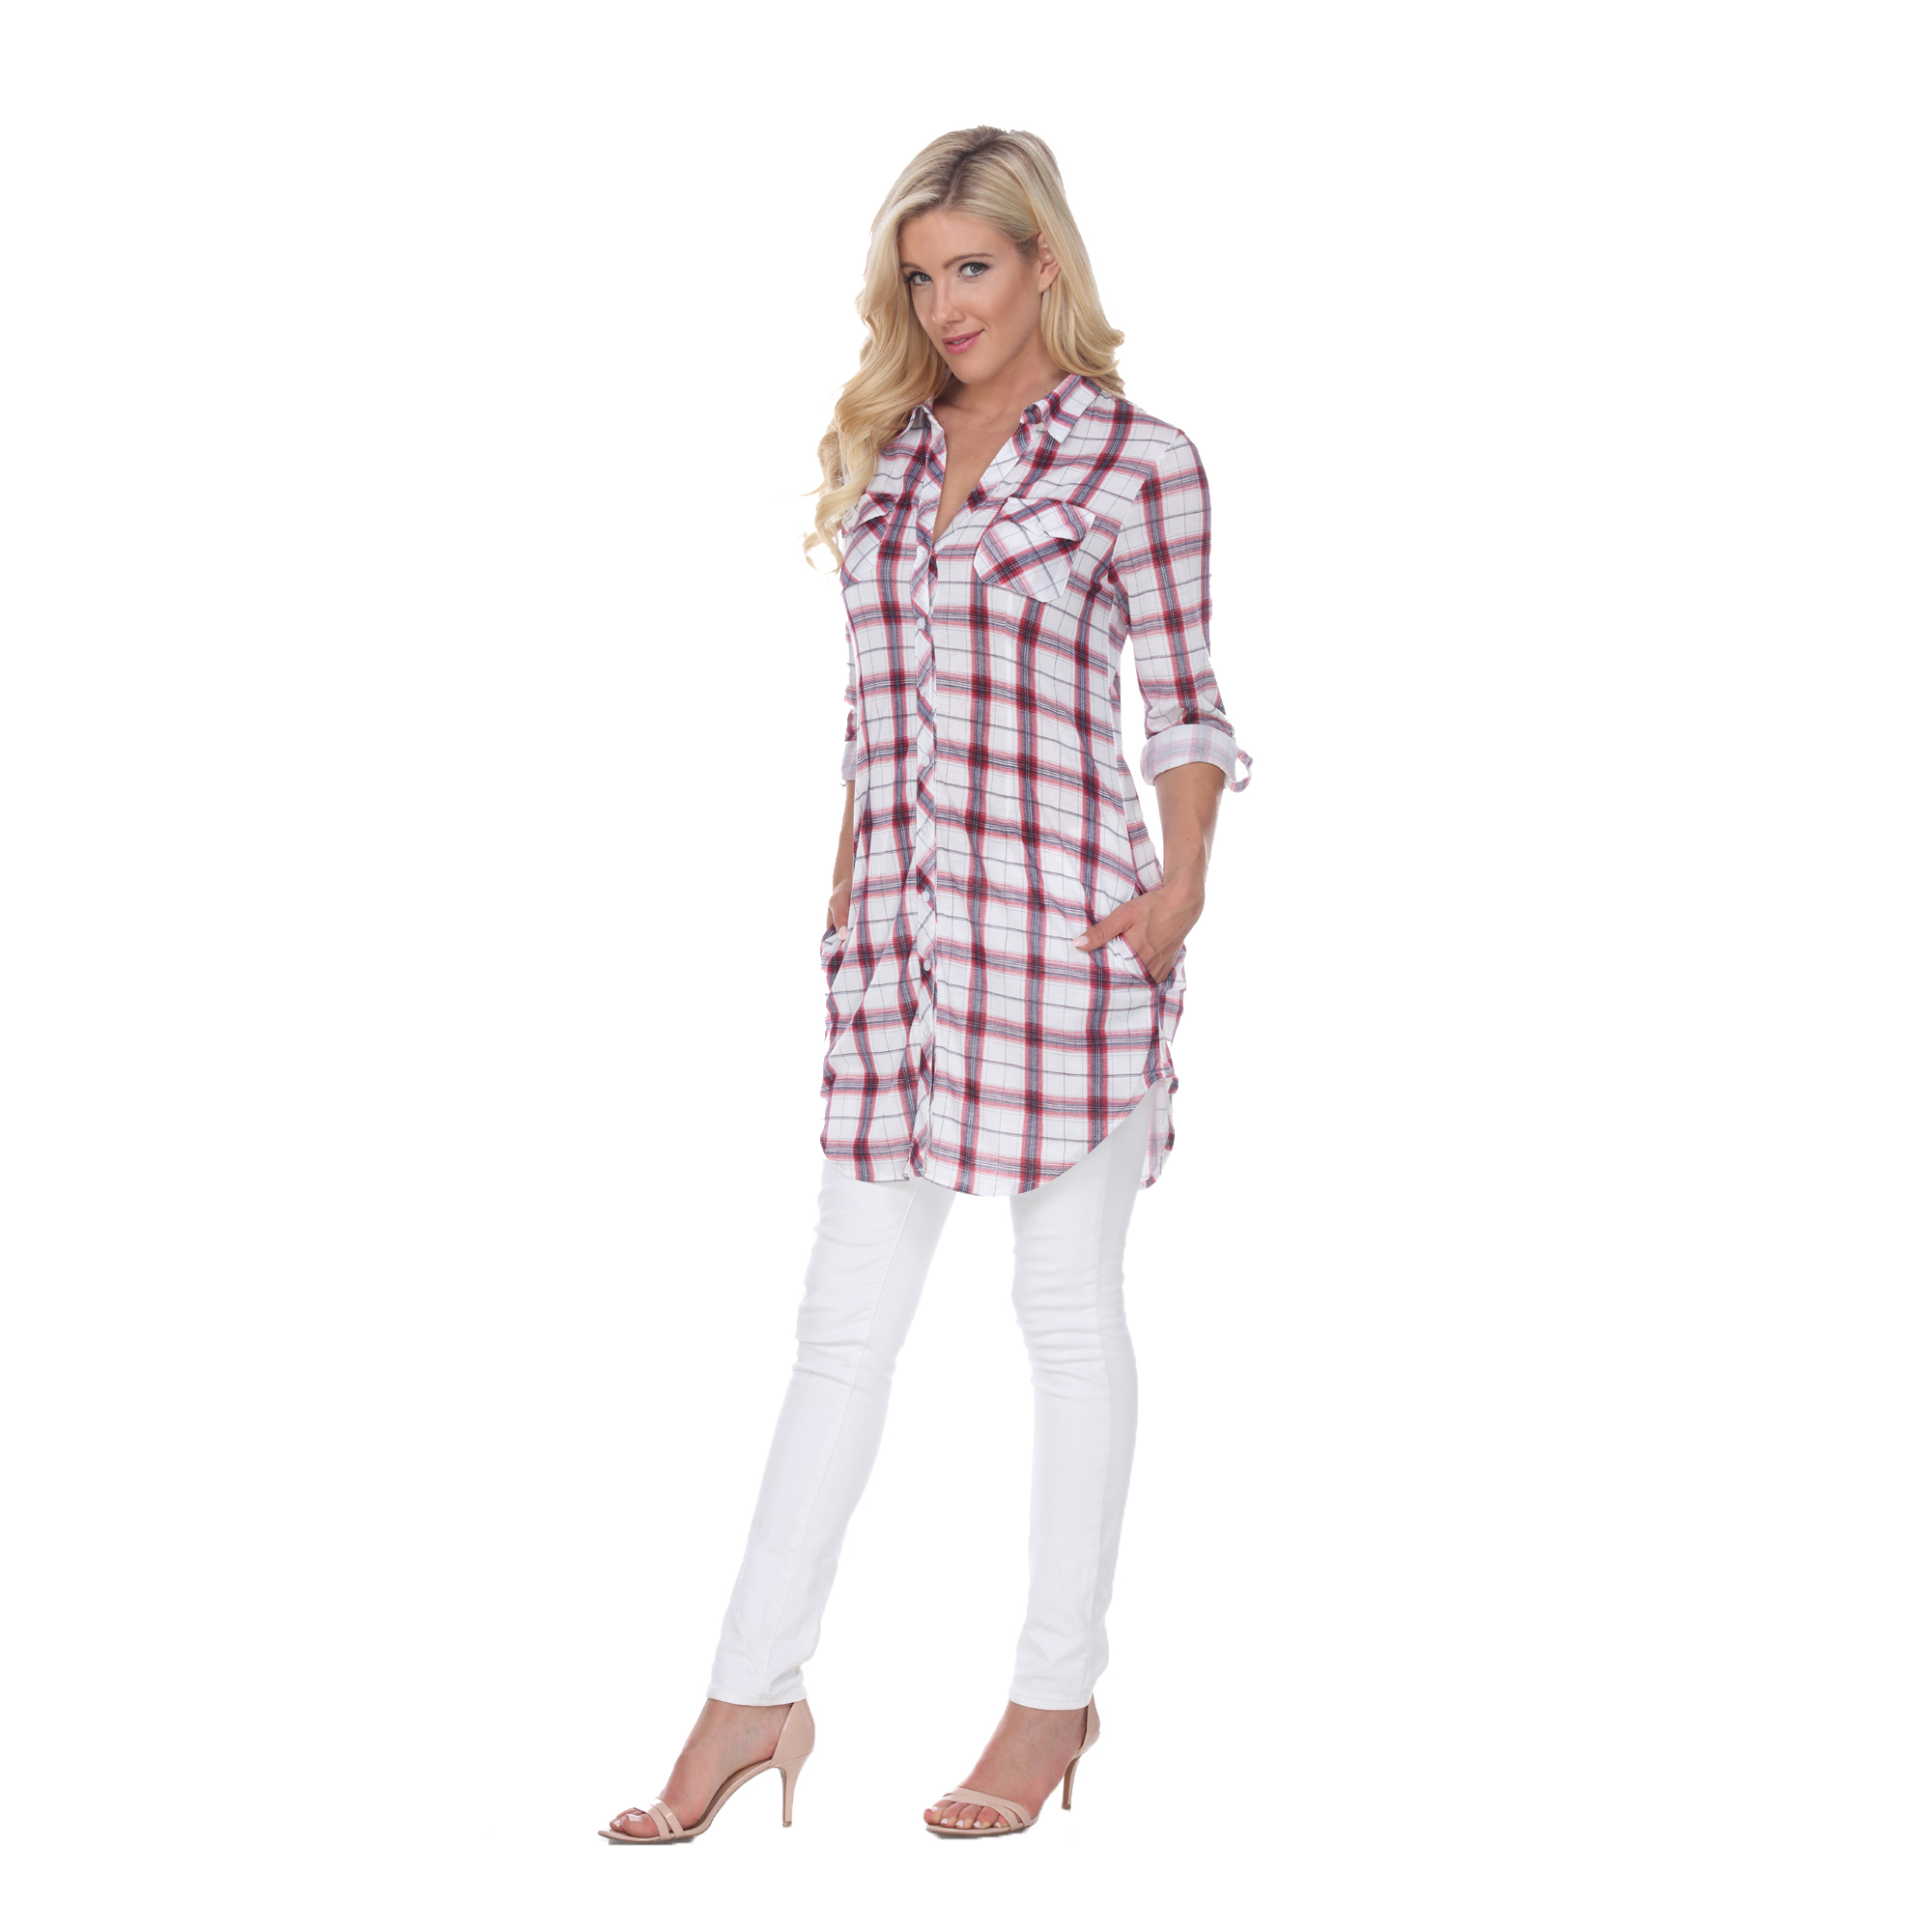 White Mark Women's Stretchy Plaid Flannel Tunic Top - Red/White, Small